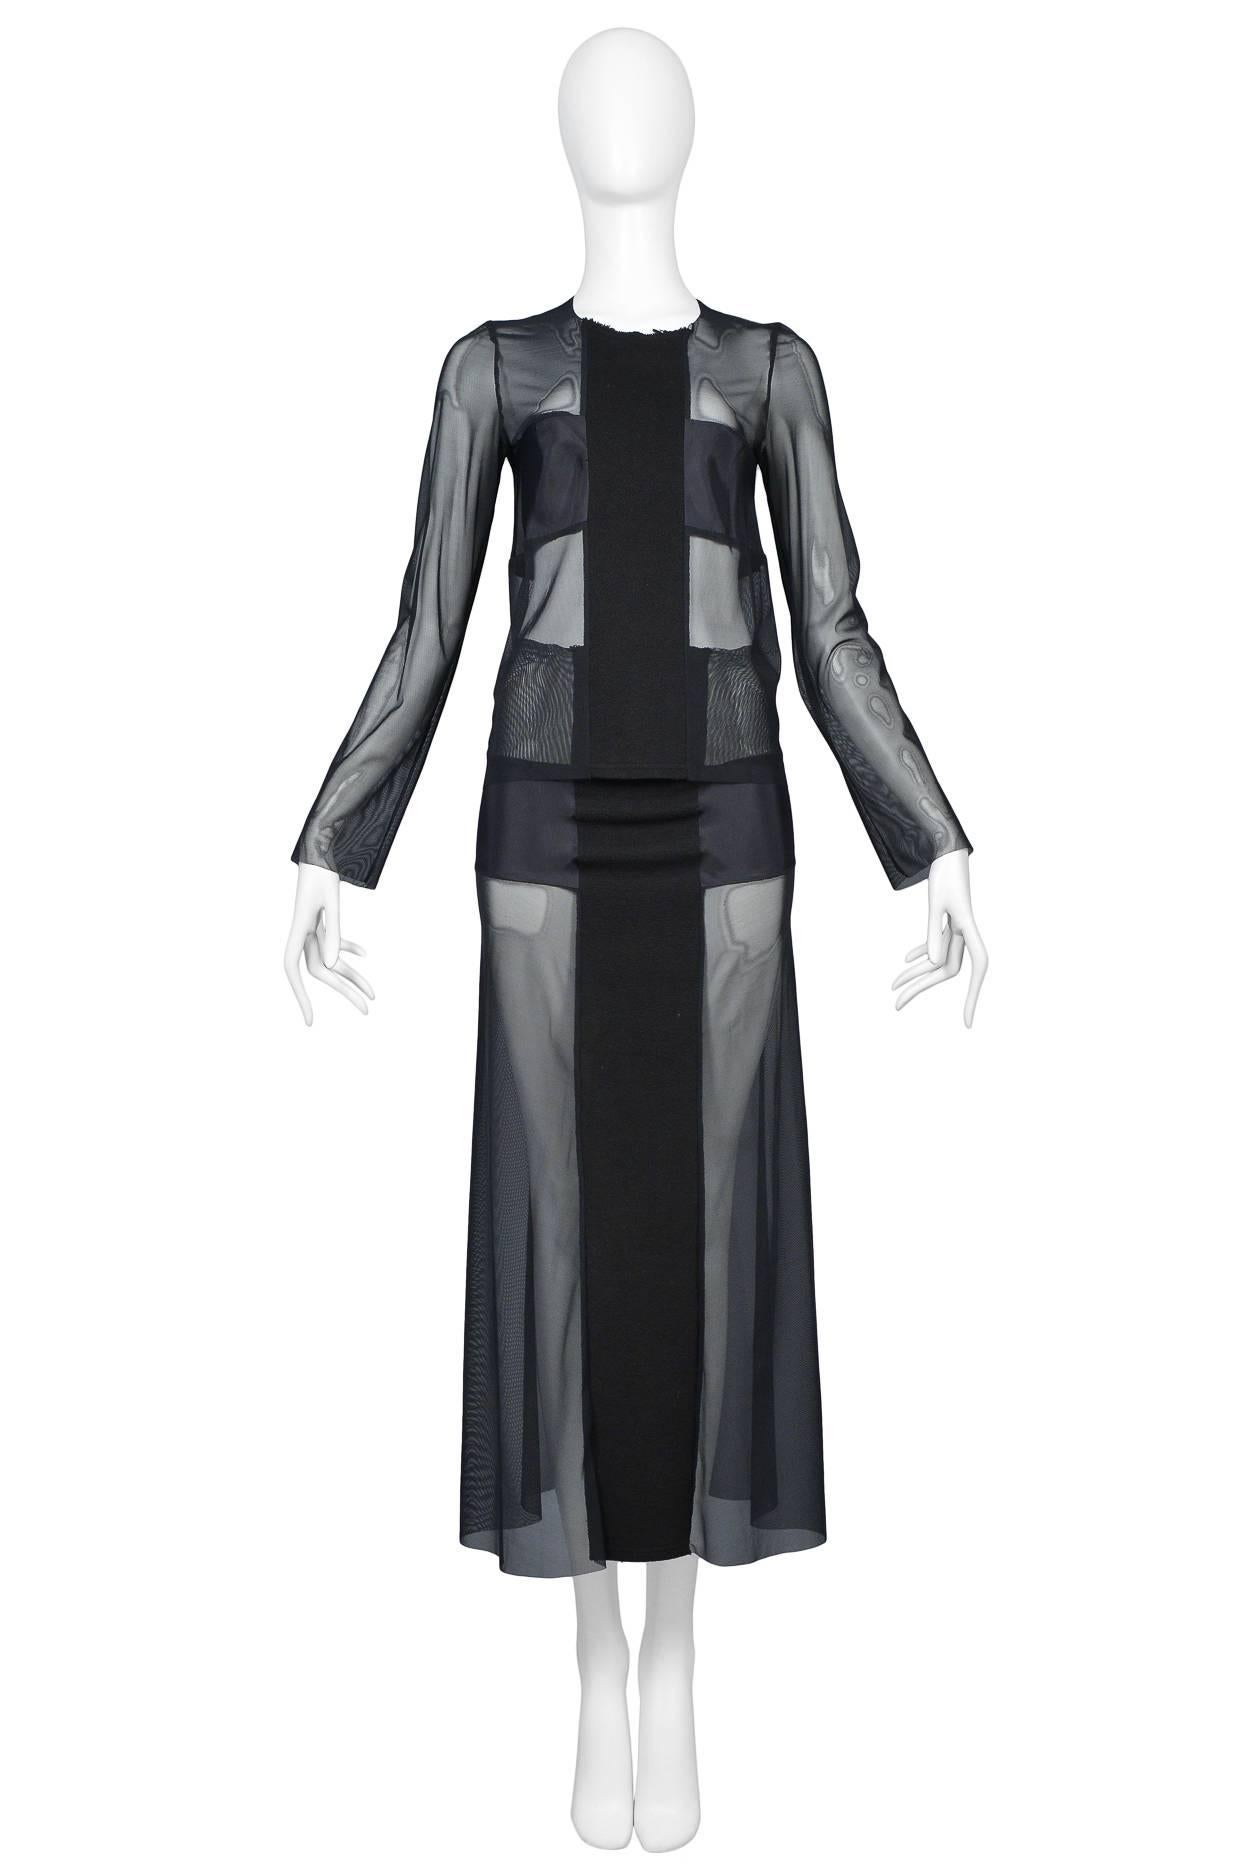 Resurrection Vintage is excited to offer a vintage Comme des Garcons mesh ensemble featuring a top with a center front black cross, high neck, raw edges, and long sleeves. The skirt features a soft waistband, a front contrasting panel, and ankle